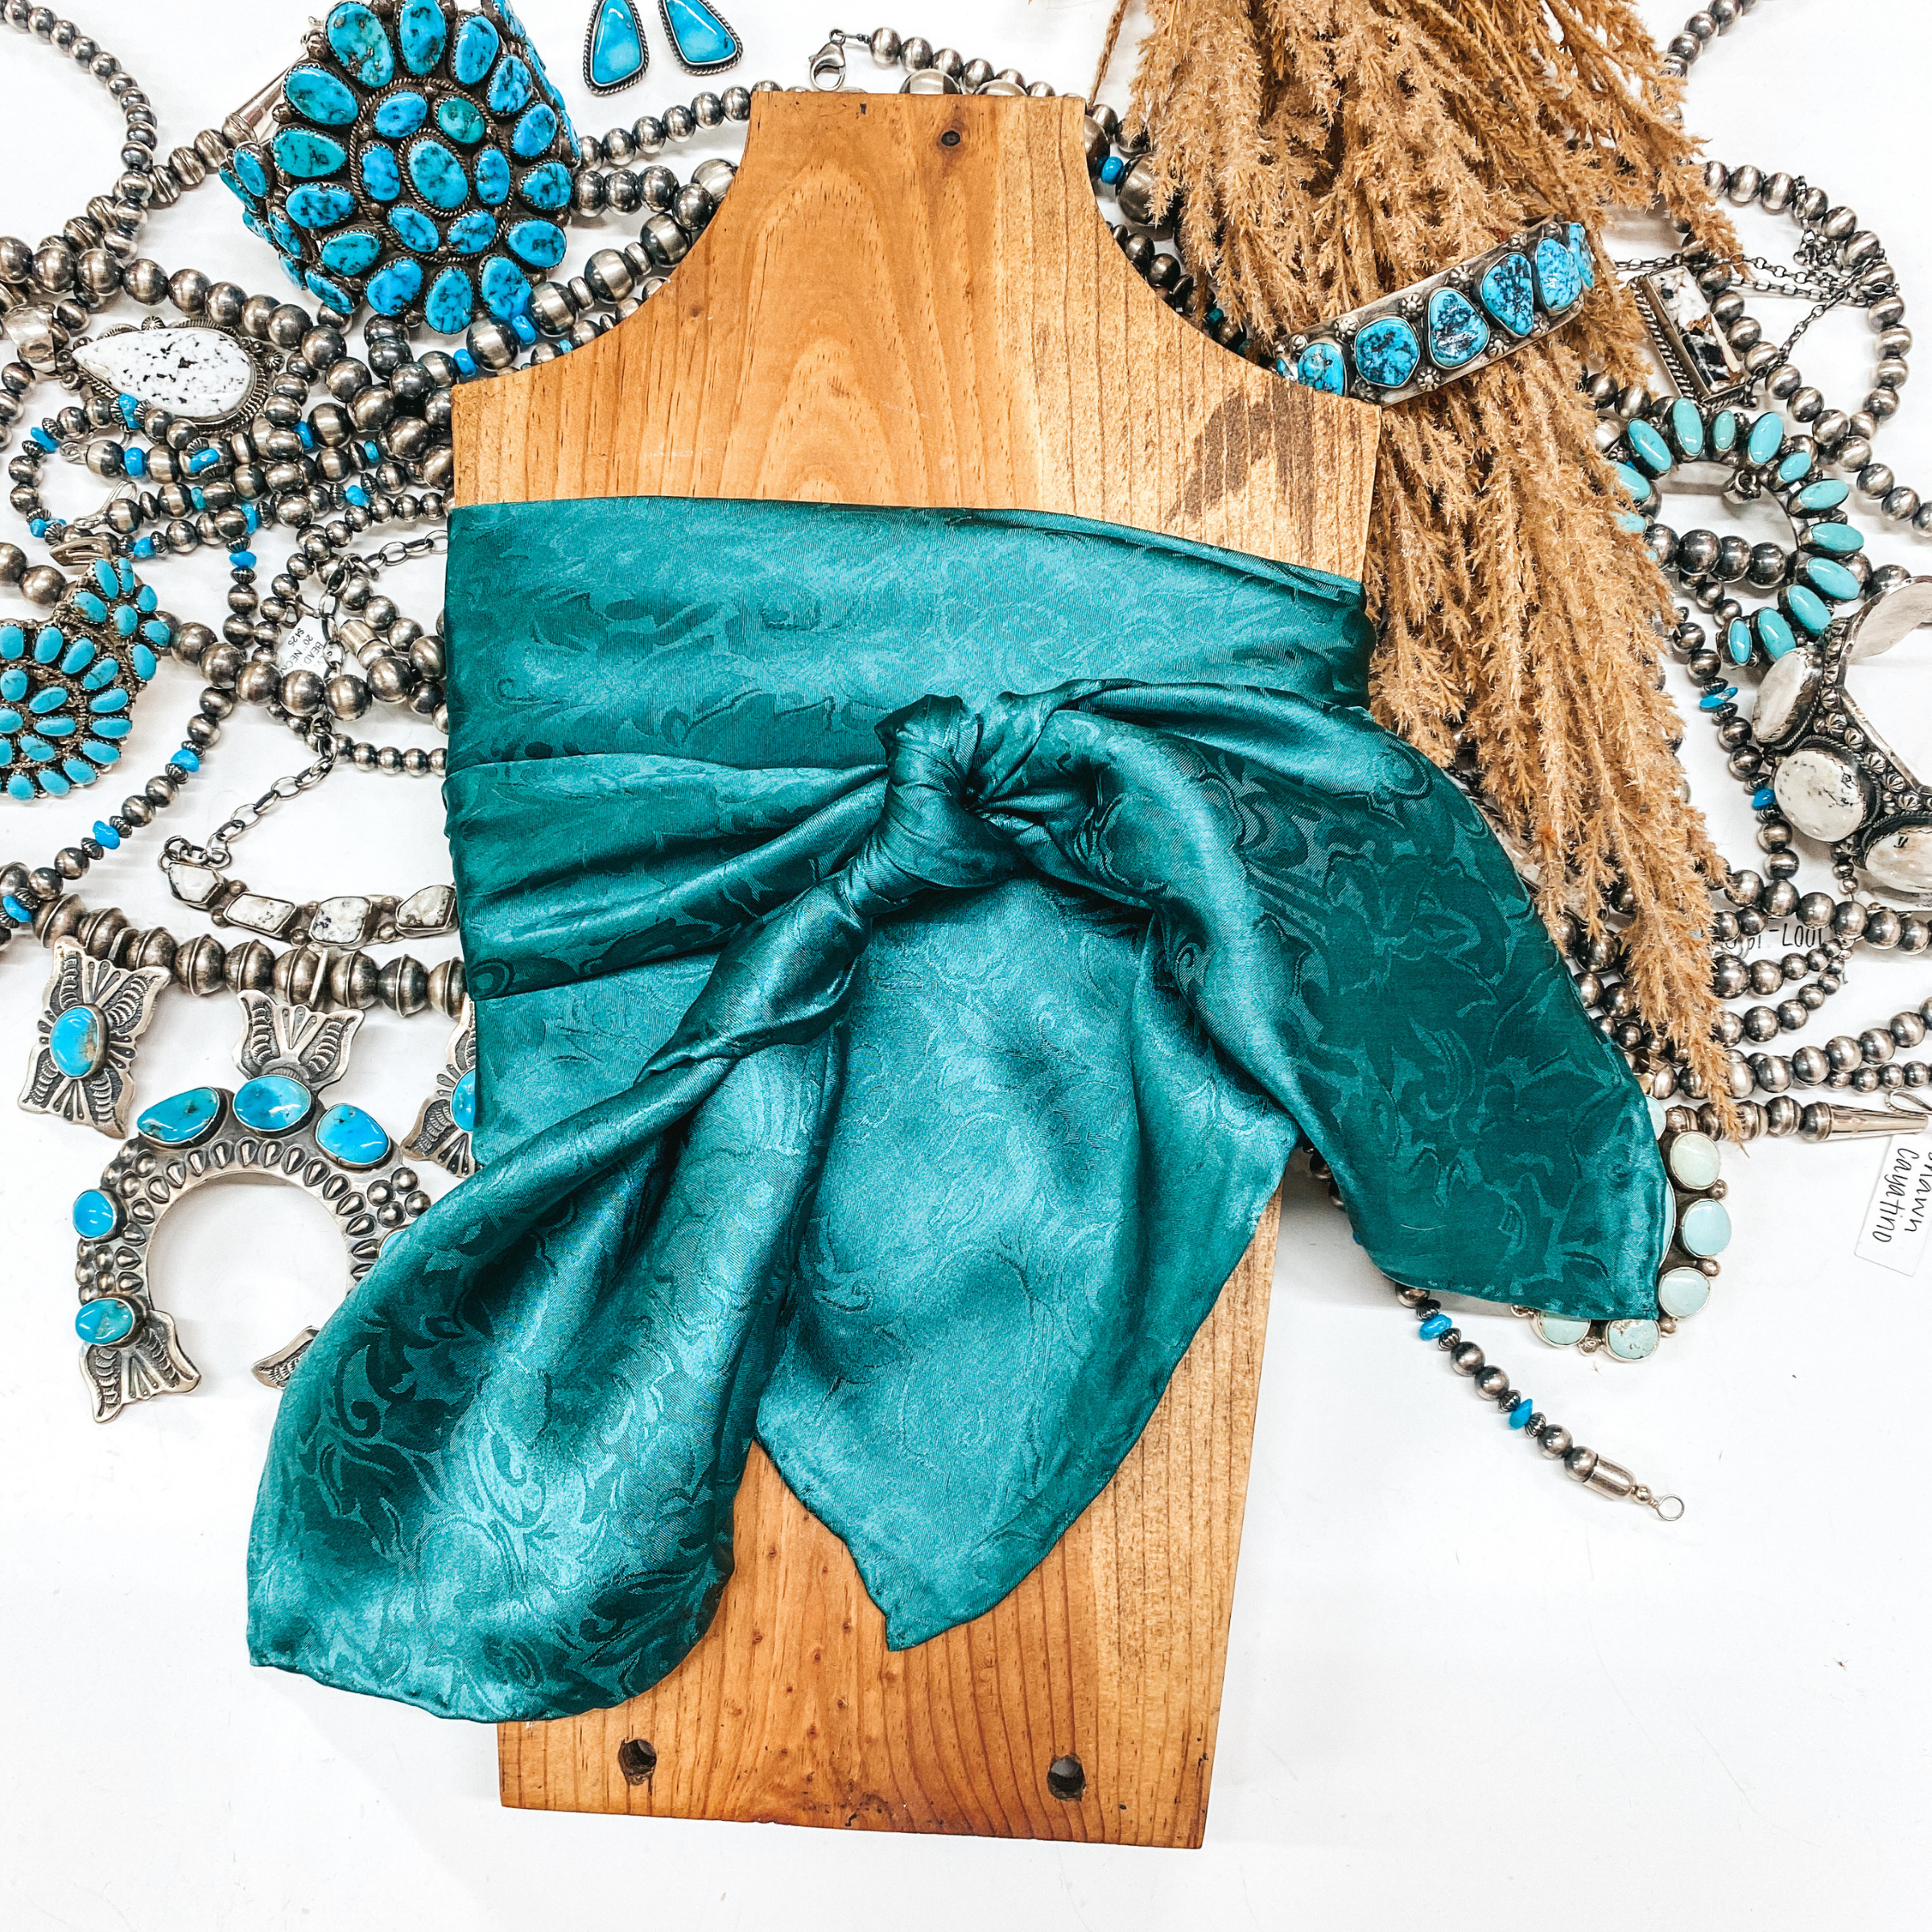 Jacquard Wild Rag in Teal - Giddy Up Glamour Boutique